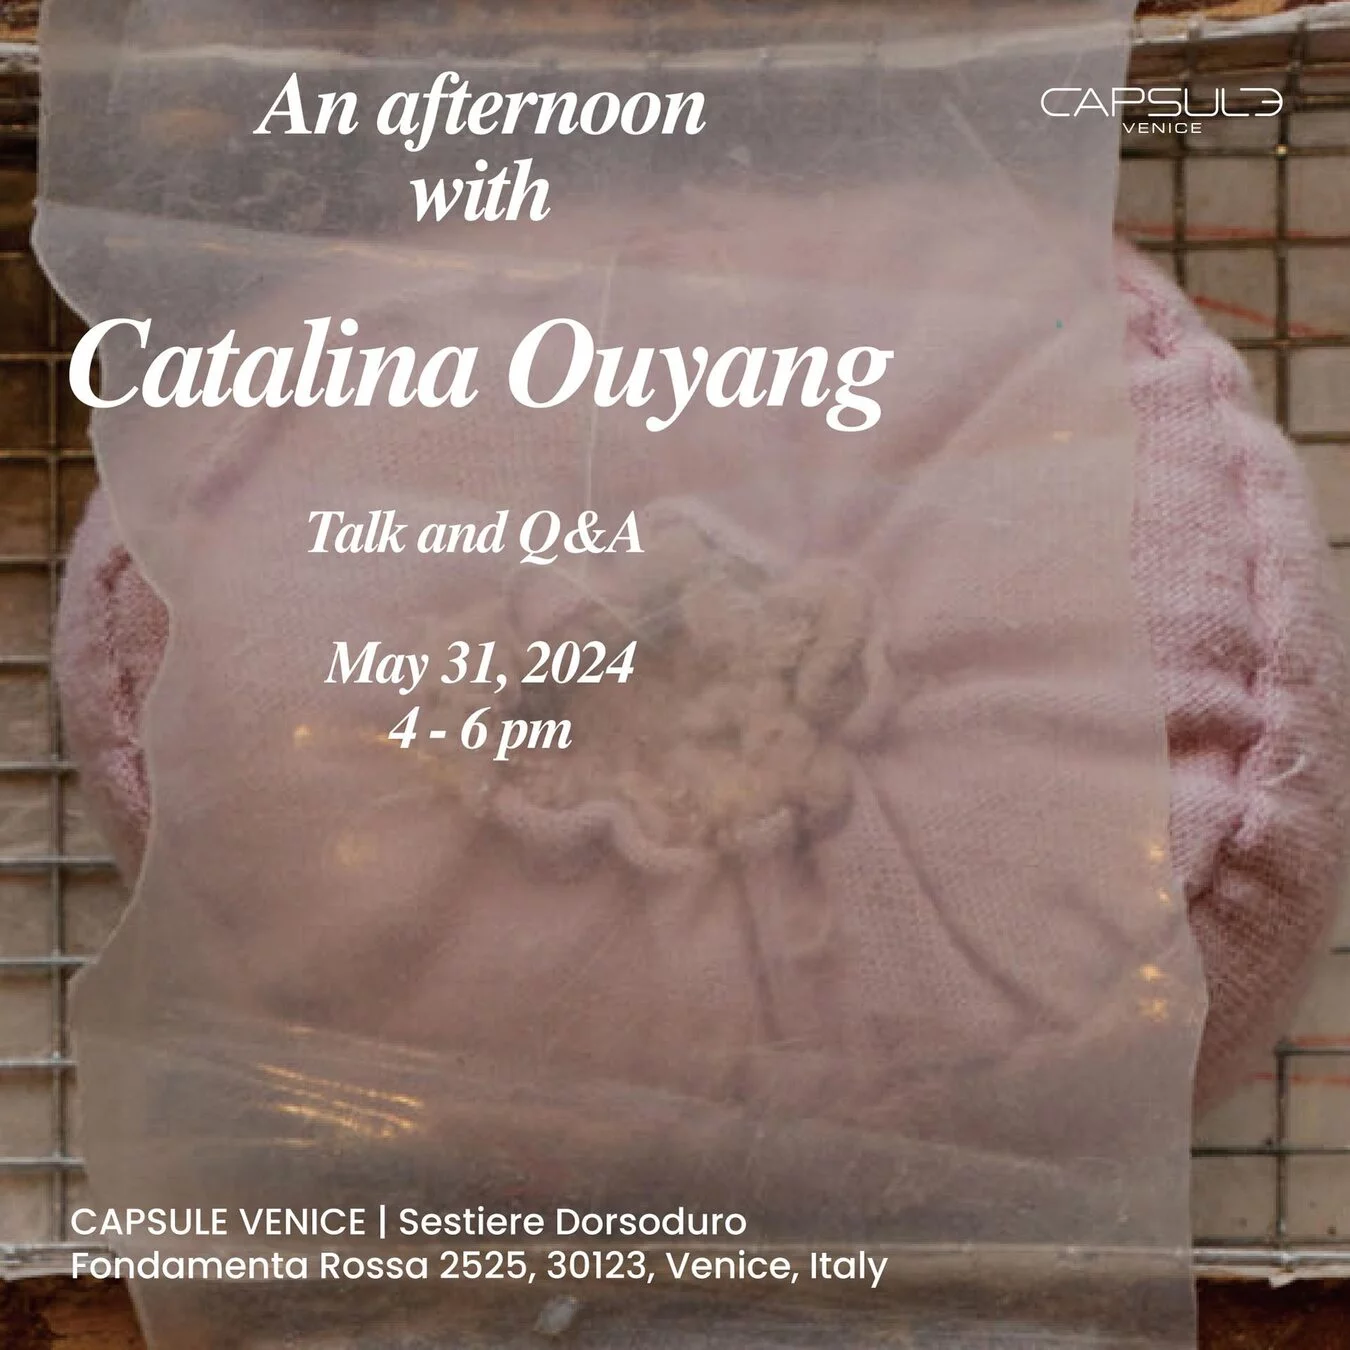 An Afternoon with. Catalina Ouyang